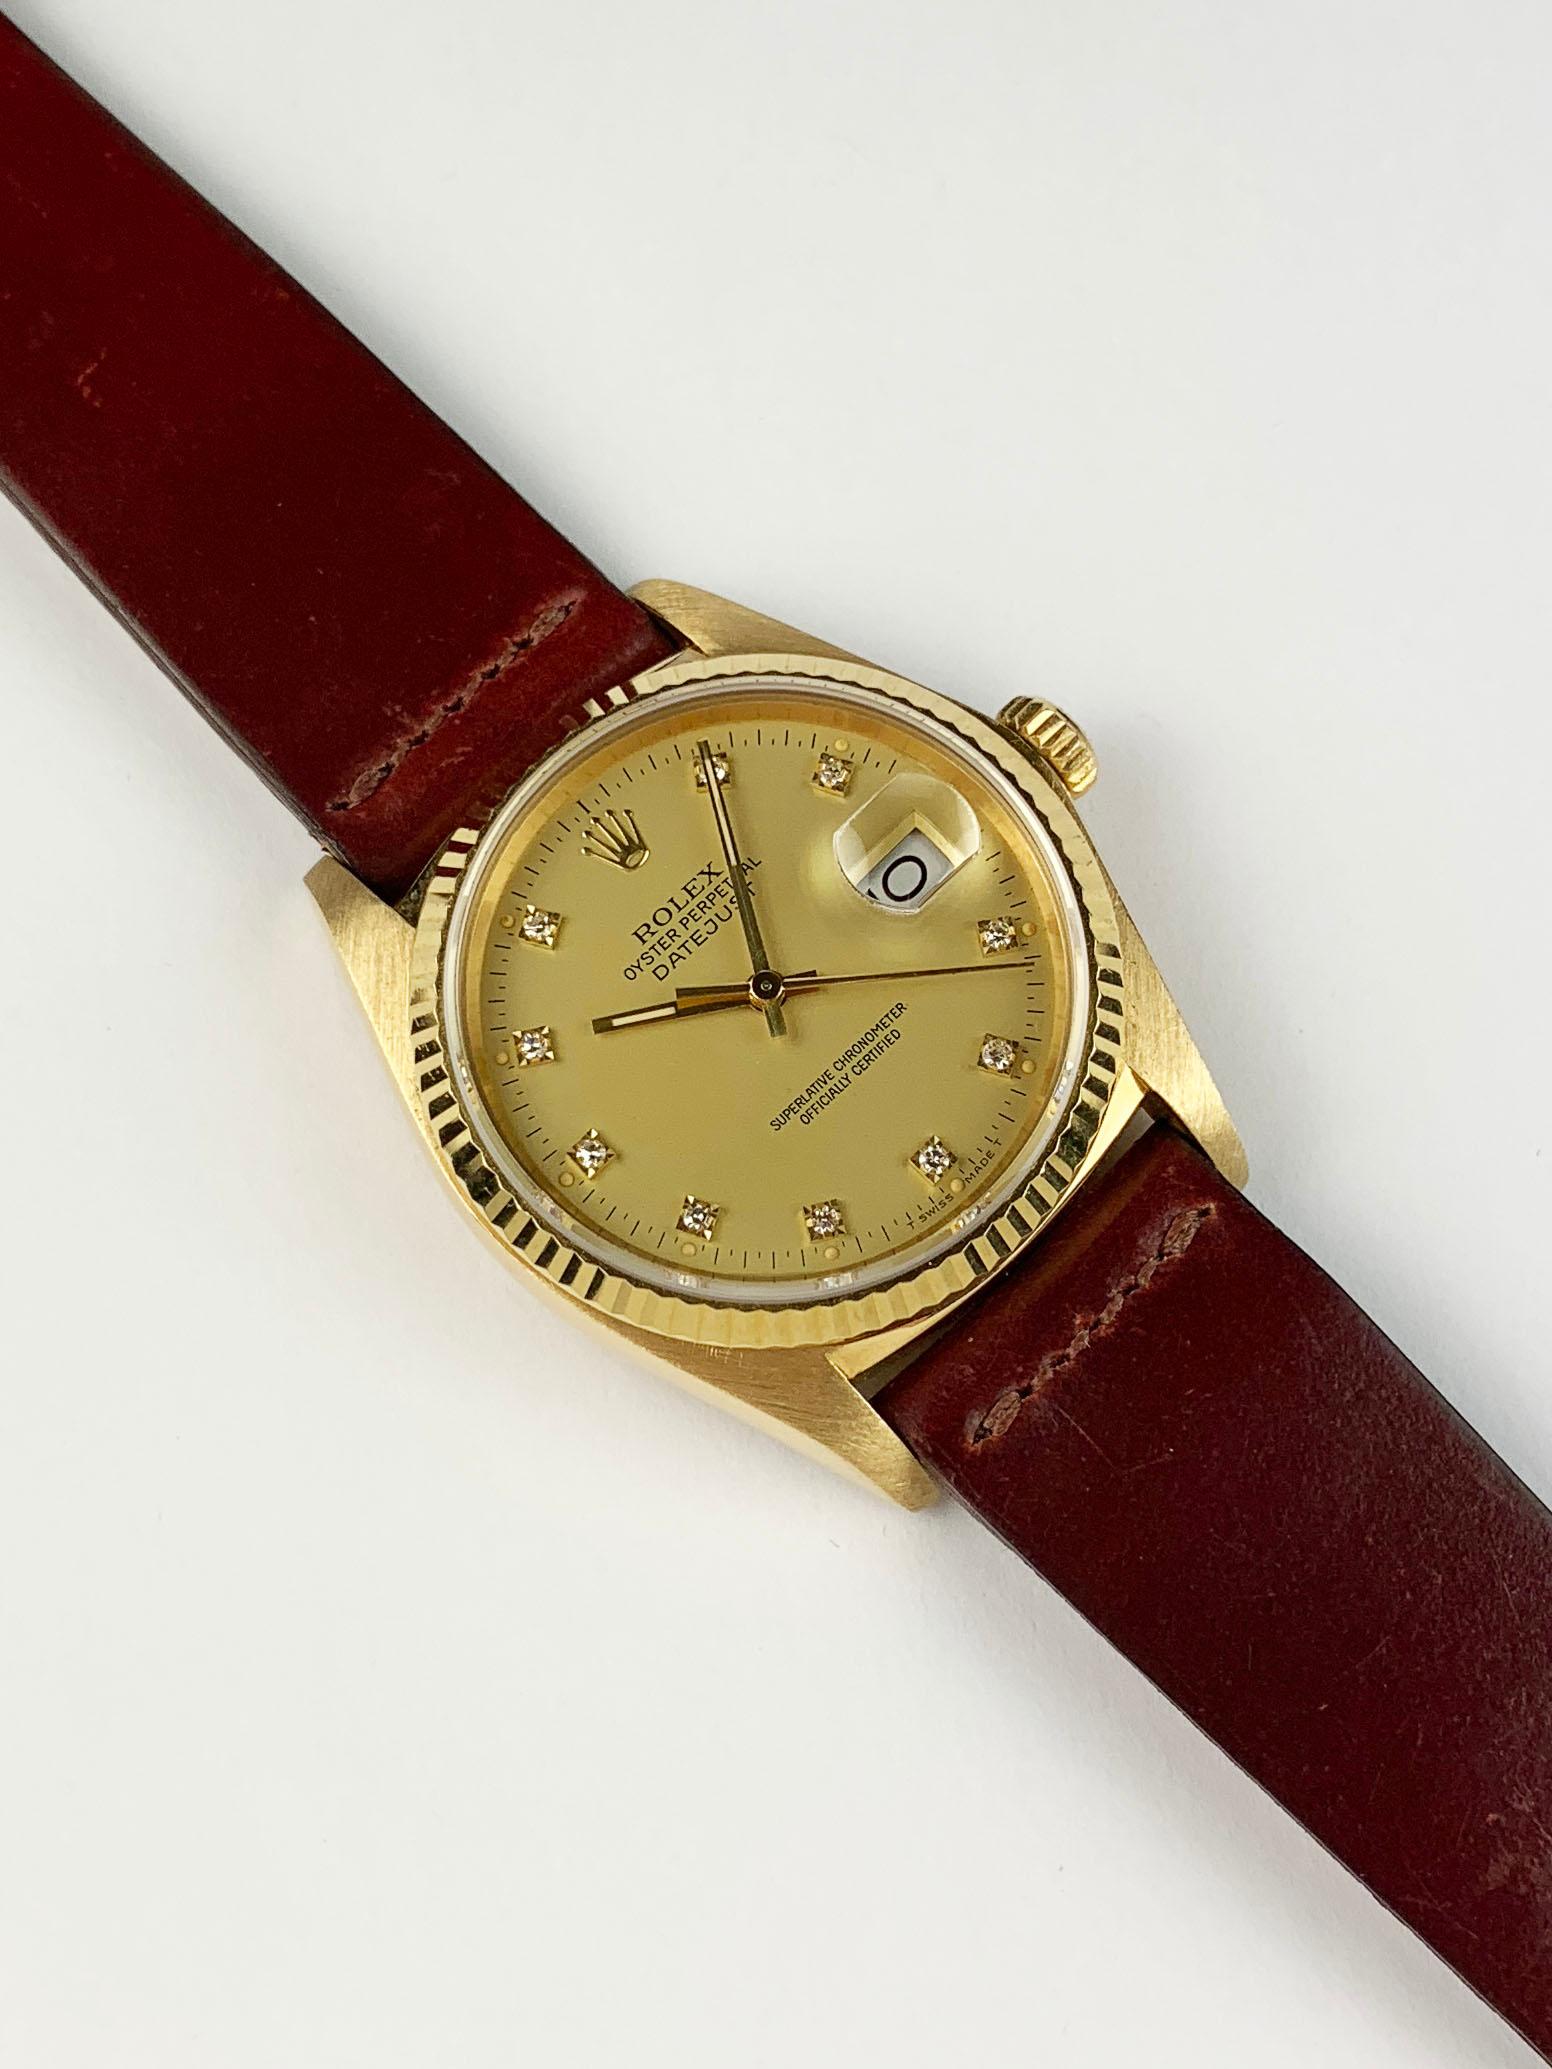 Rolex 18K Yellow Gold Oyster Perpetual Datejust Wristwatch
Factory Champagne Diamond Dial with  Colored Lume Plots
18K Yellow Gold Fluted Bezel
36mm in size 
Rolex Calibre Base 3035 Automatic Quick-Set Movement
Sapphire Crystal
1980's